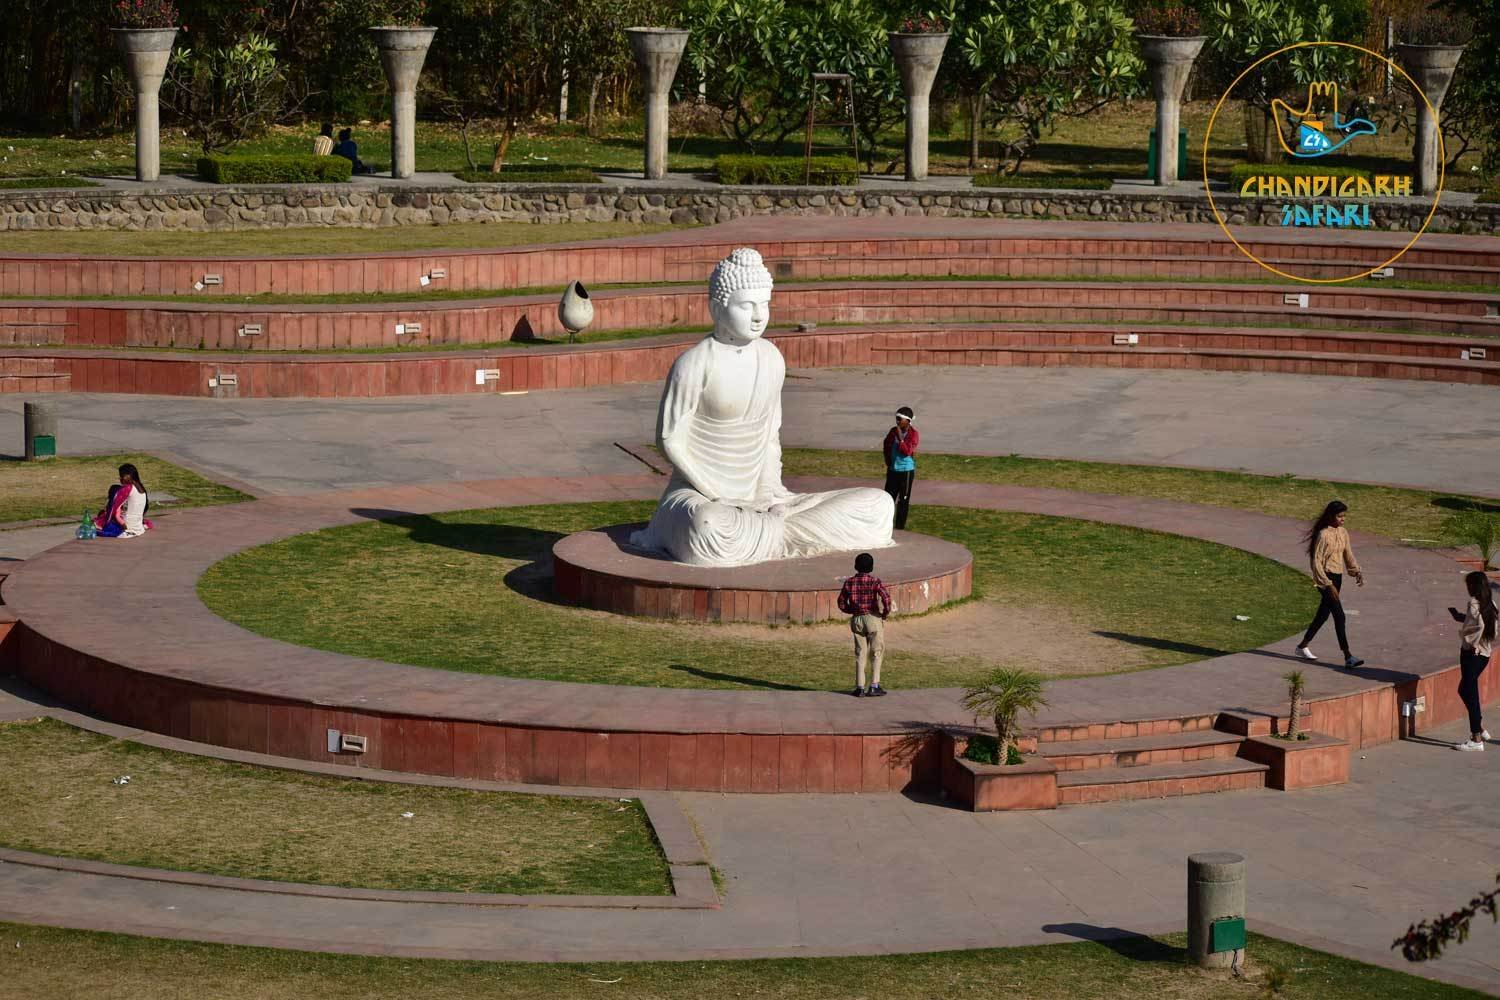 Top places to visit in Chandigarh